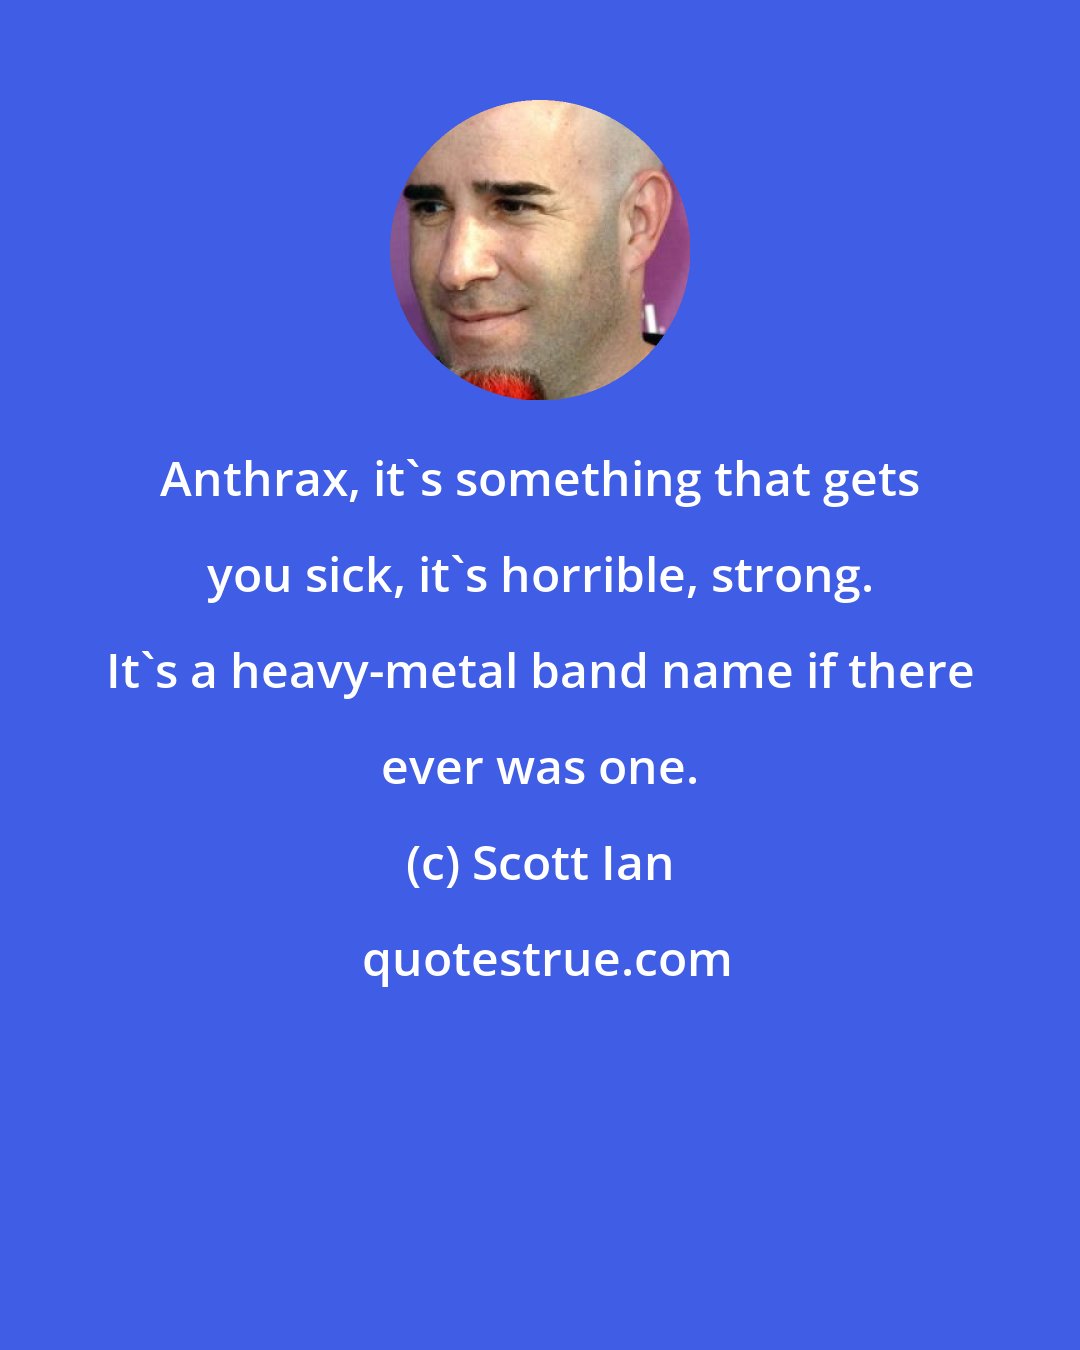 Scott Ian: Anthrax, it's something that gets you sick, it's horrible, strong. It's a heavy-metal band name if there ever was one.